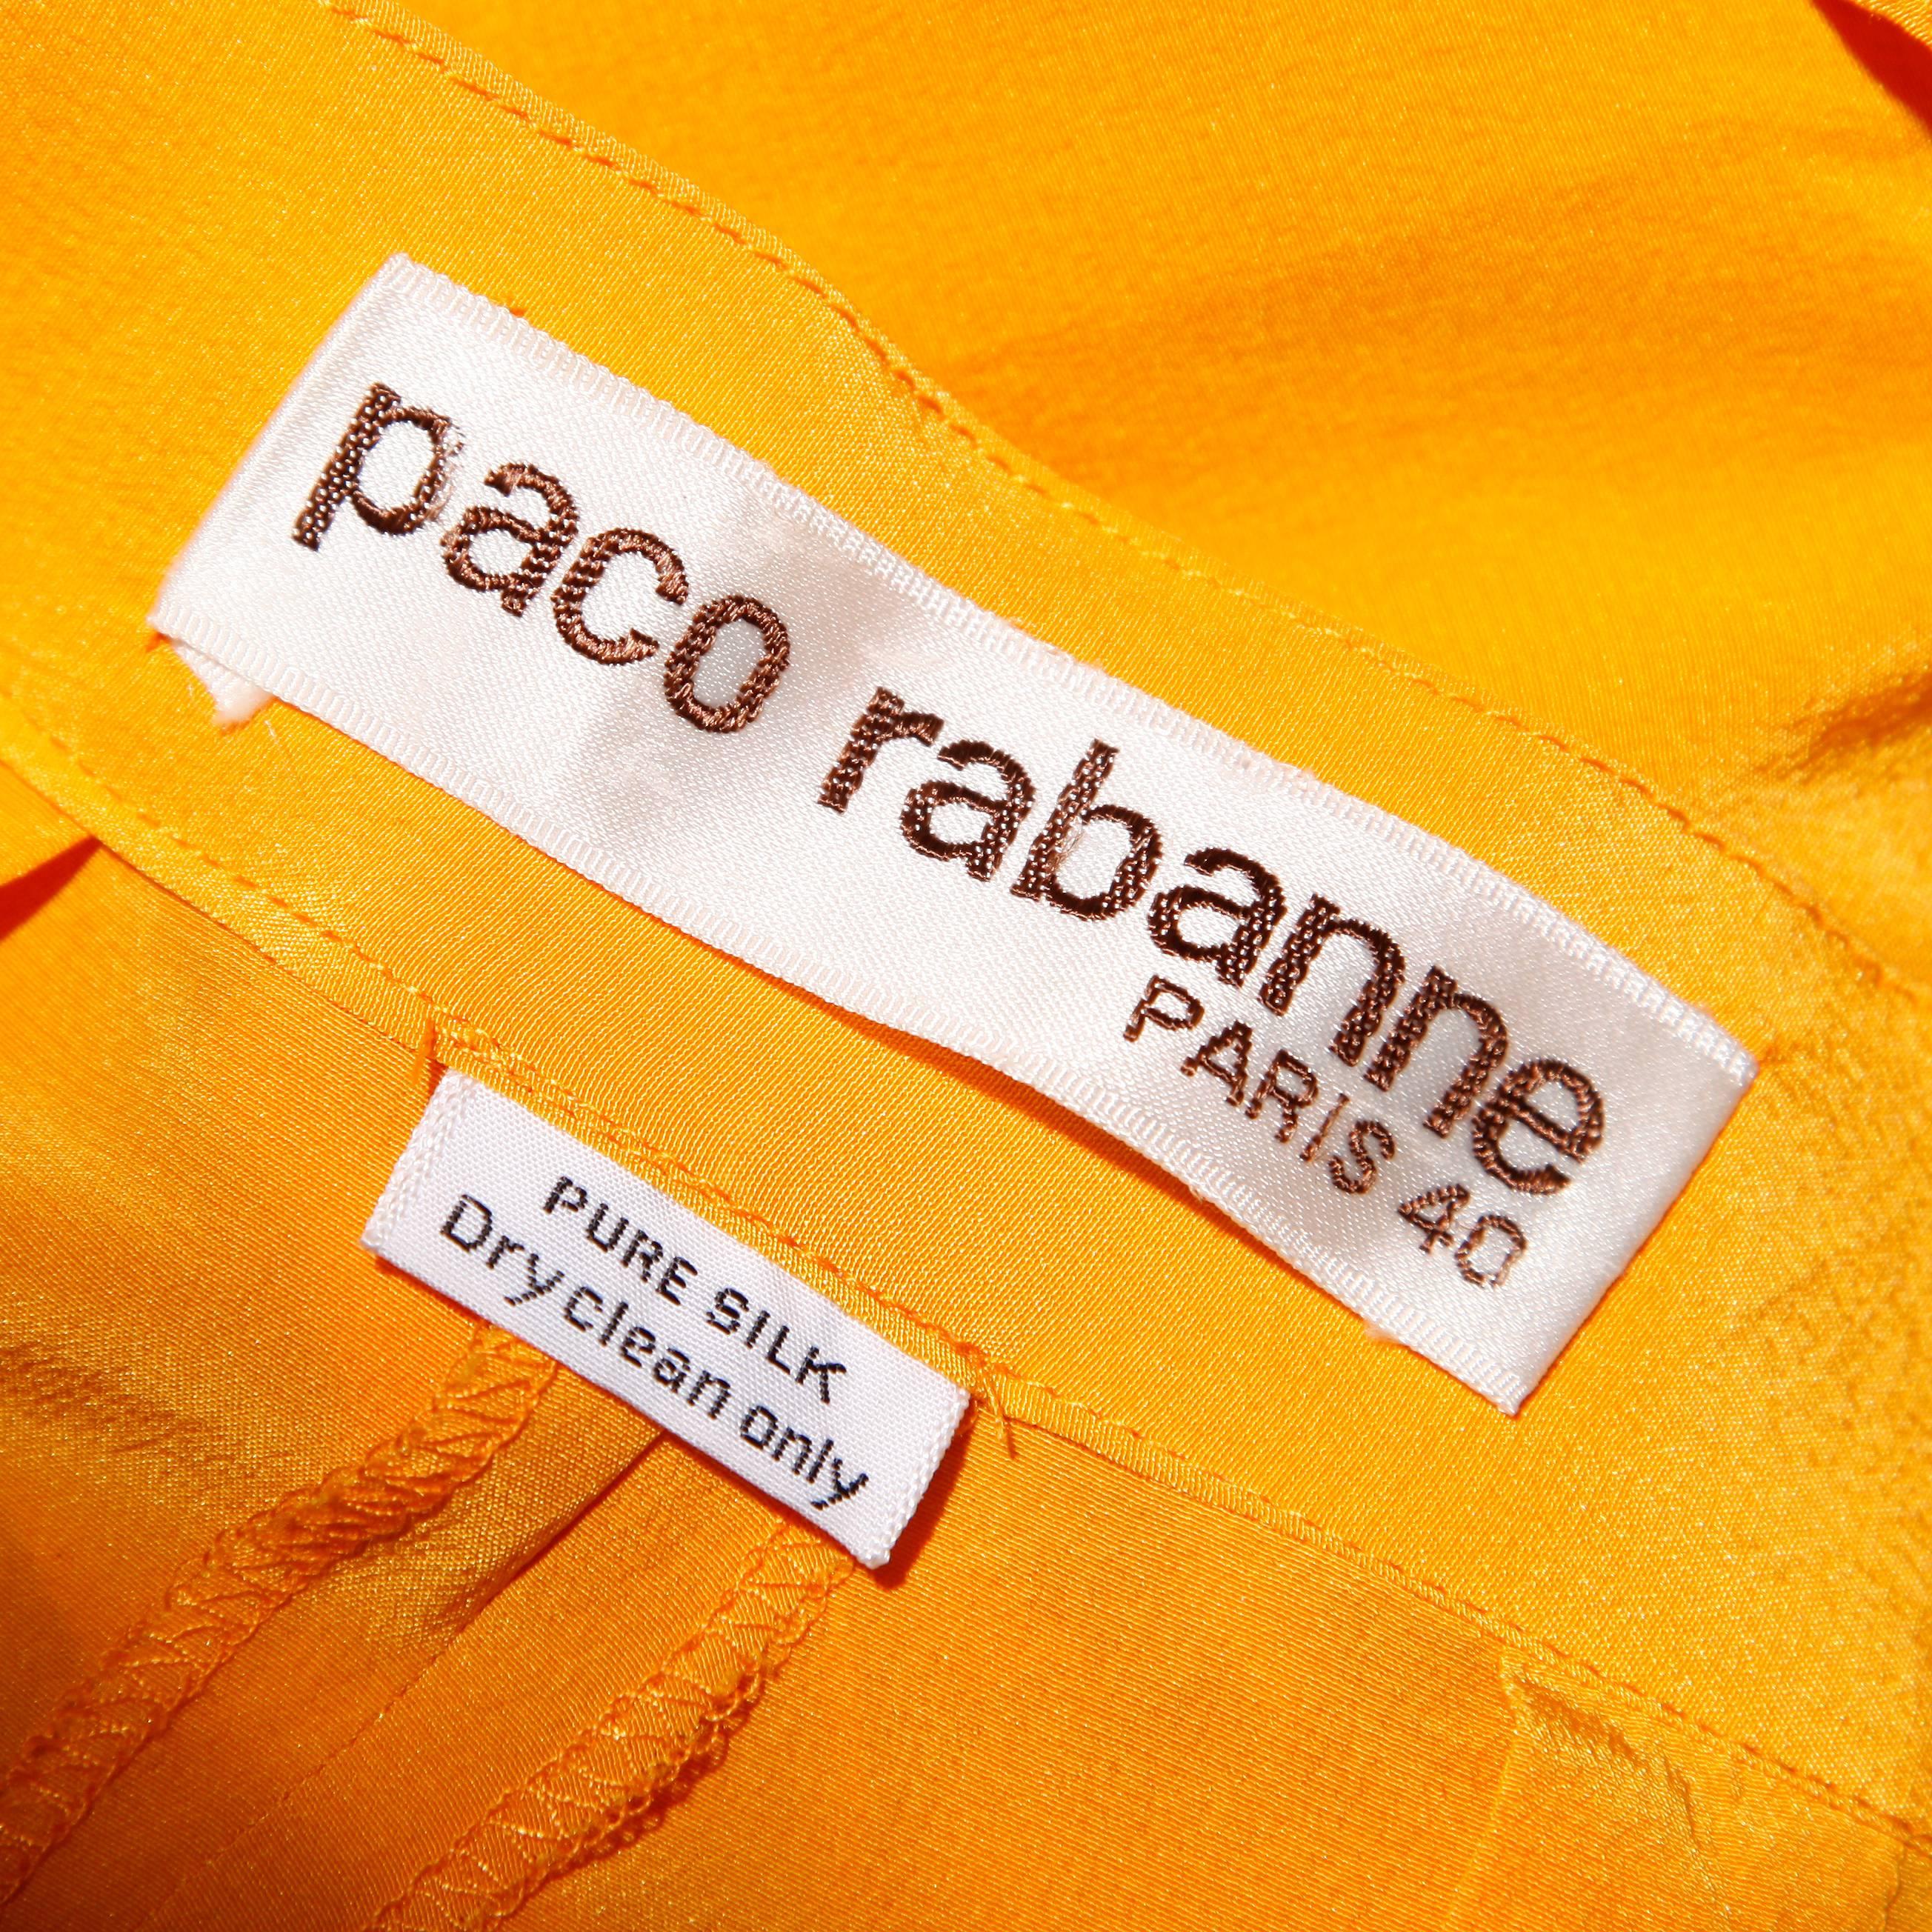 Chic 1980s ruffled deep tangerine-yellow cropped pants by Paco Rabanne. Tapered hemline hits right below the knee. Voluminous shape with ruffled detail.

Details: 

Unlined
Front Pockets
Front Zip with Button
Marked Size: EU 40
Estimated